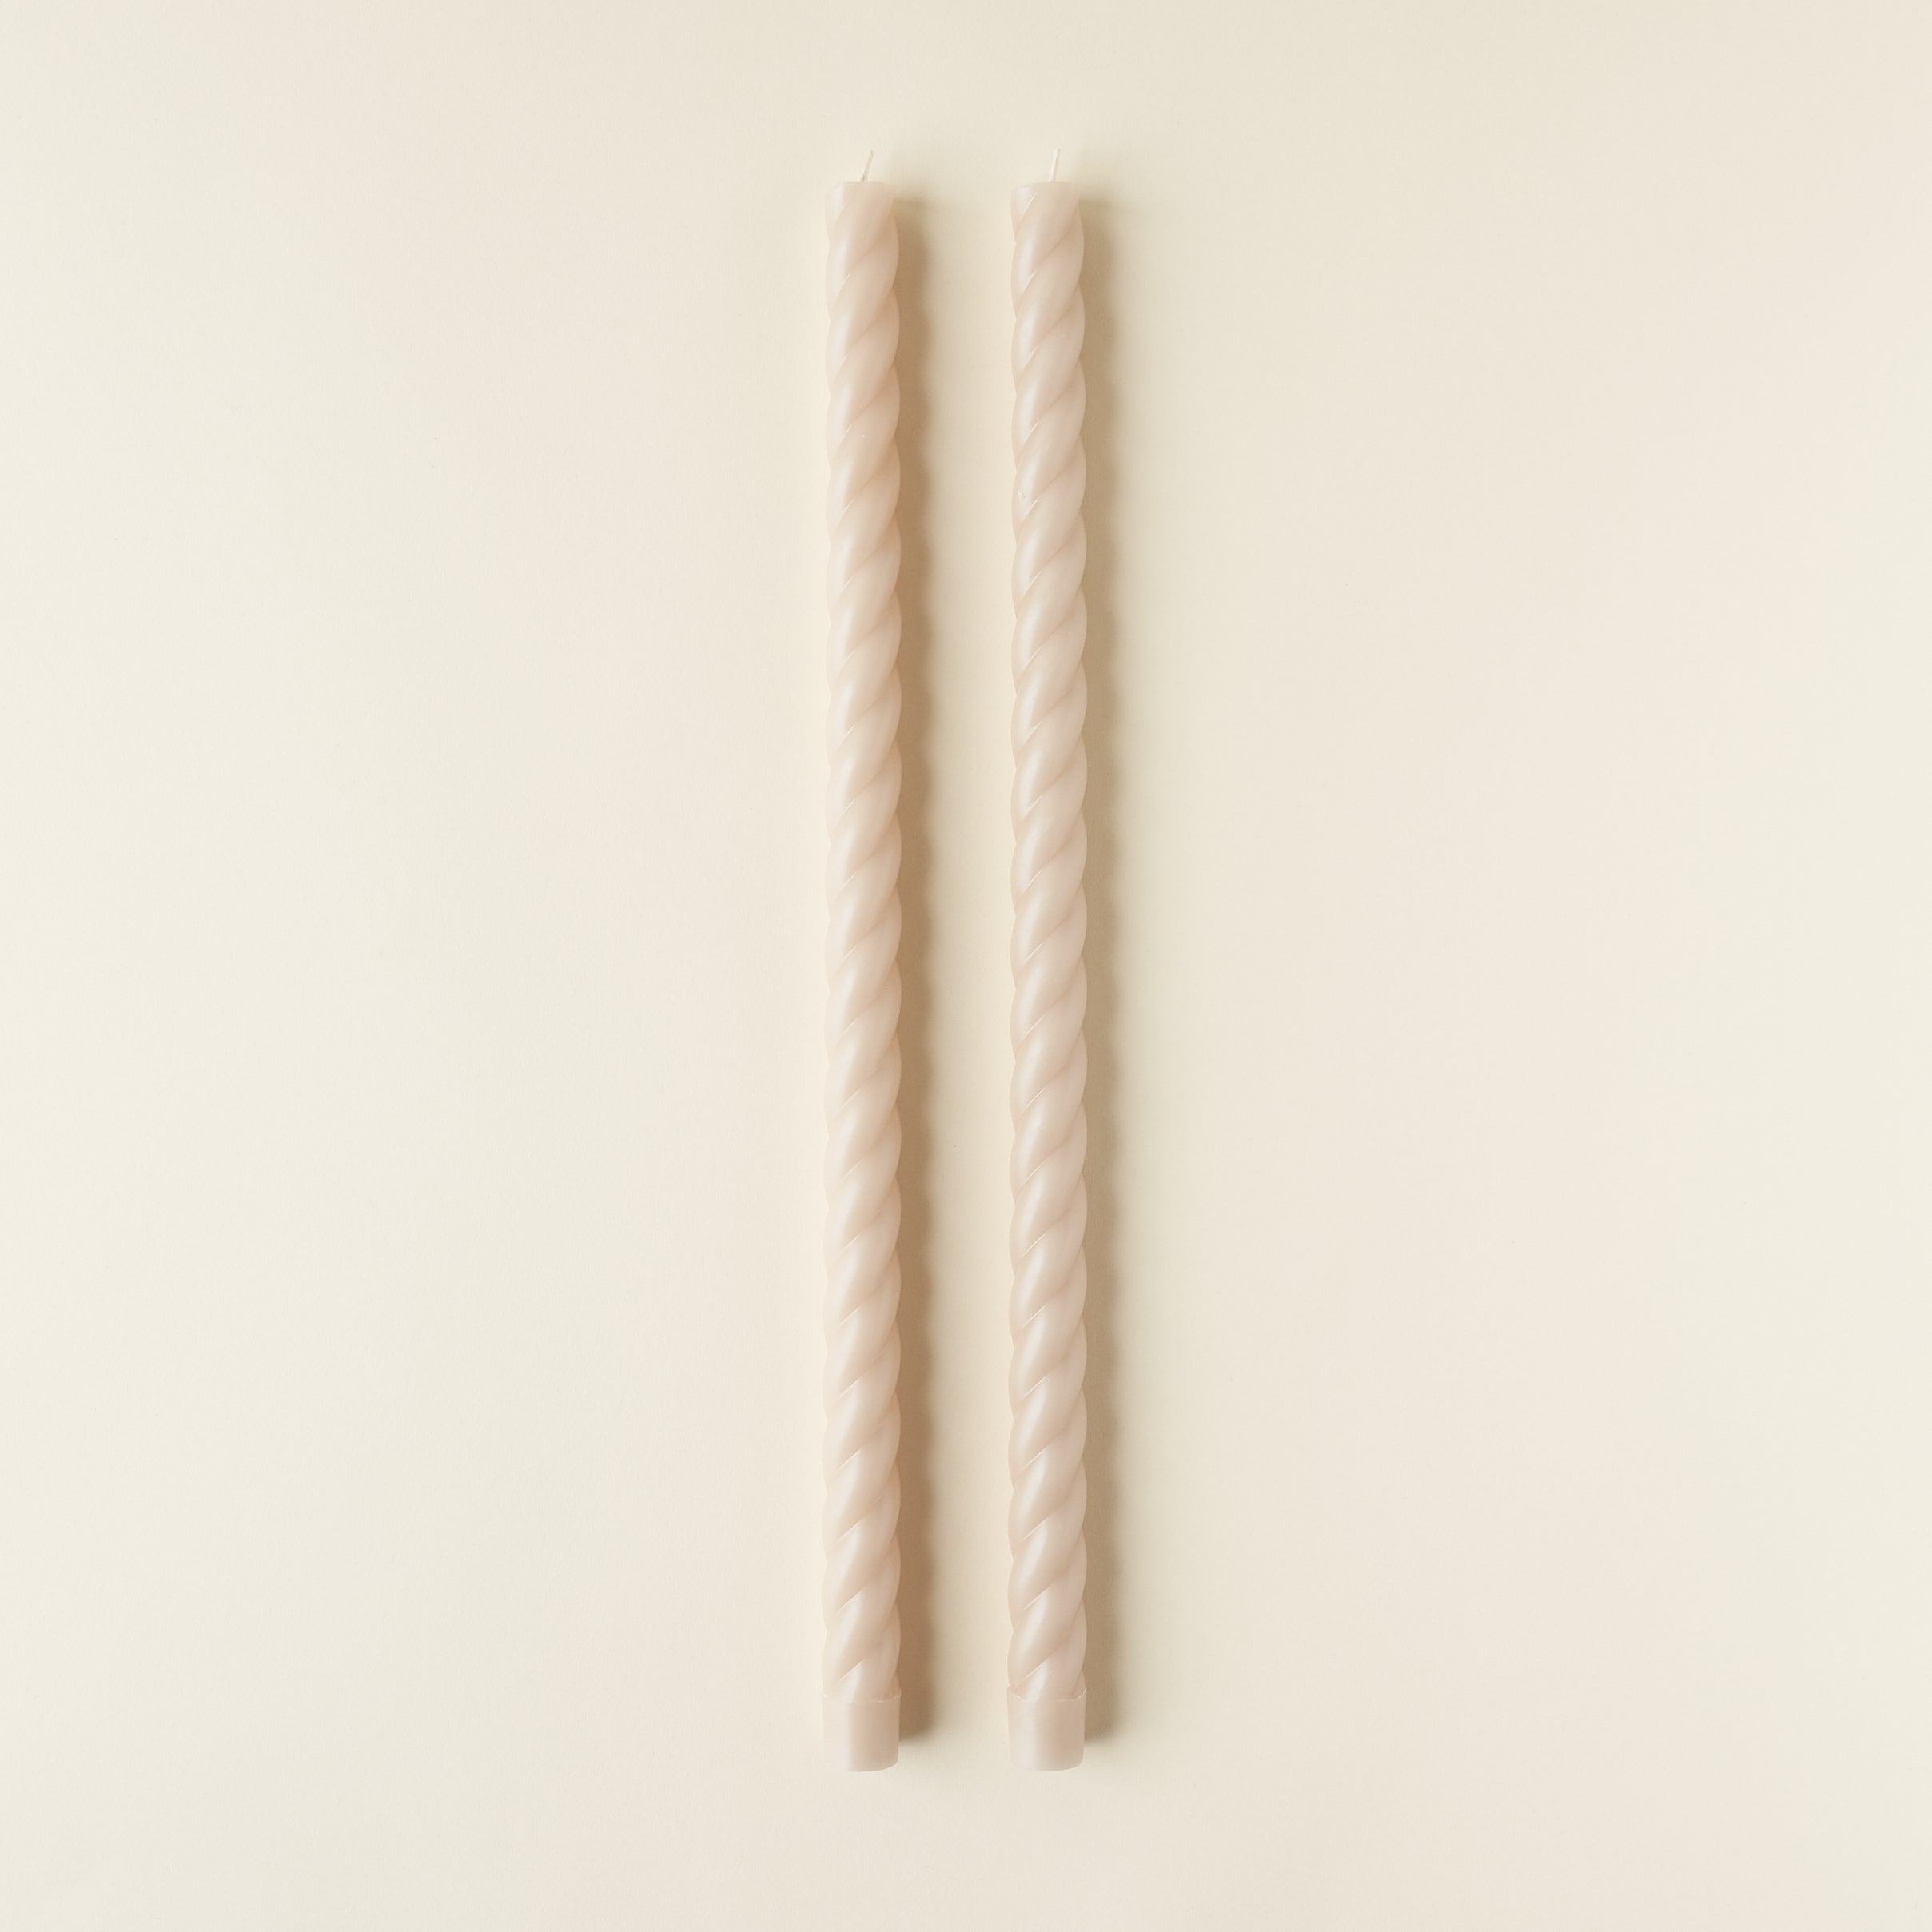 18" Twisted Taper Candles - Set of 2